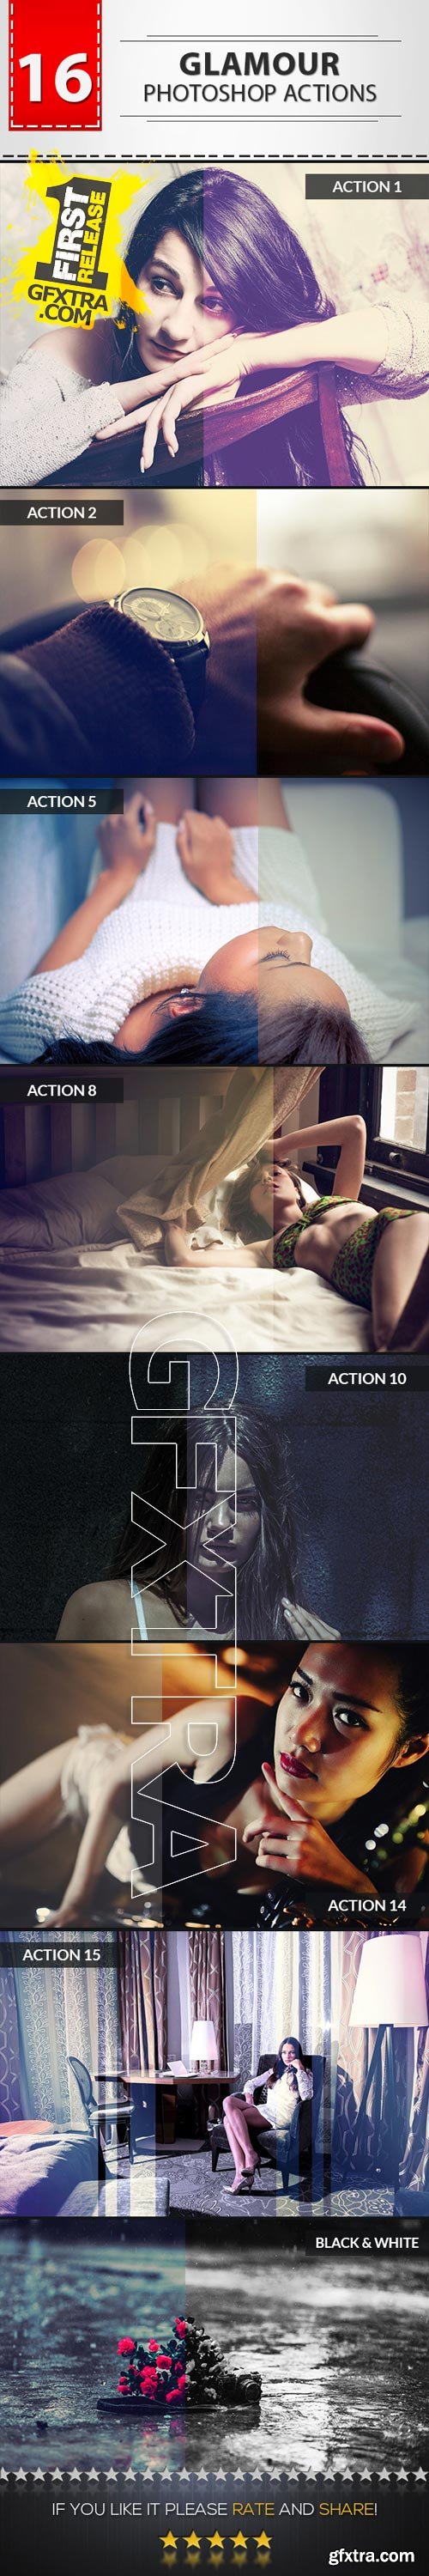 Graphicriver 16 Glamour Photoshop Actions 9719399